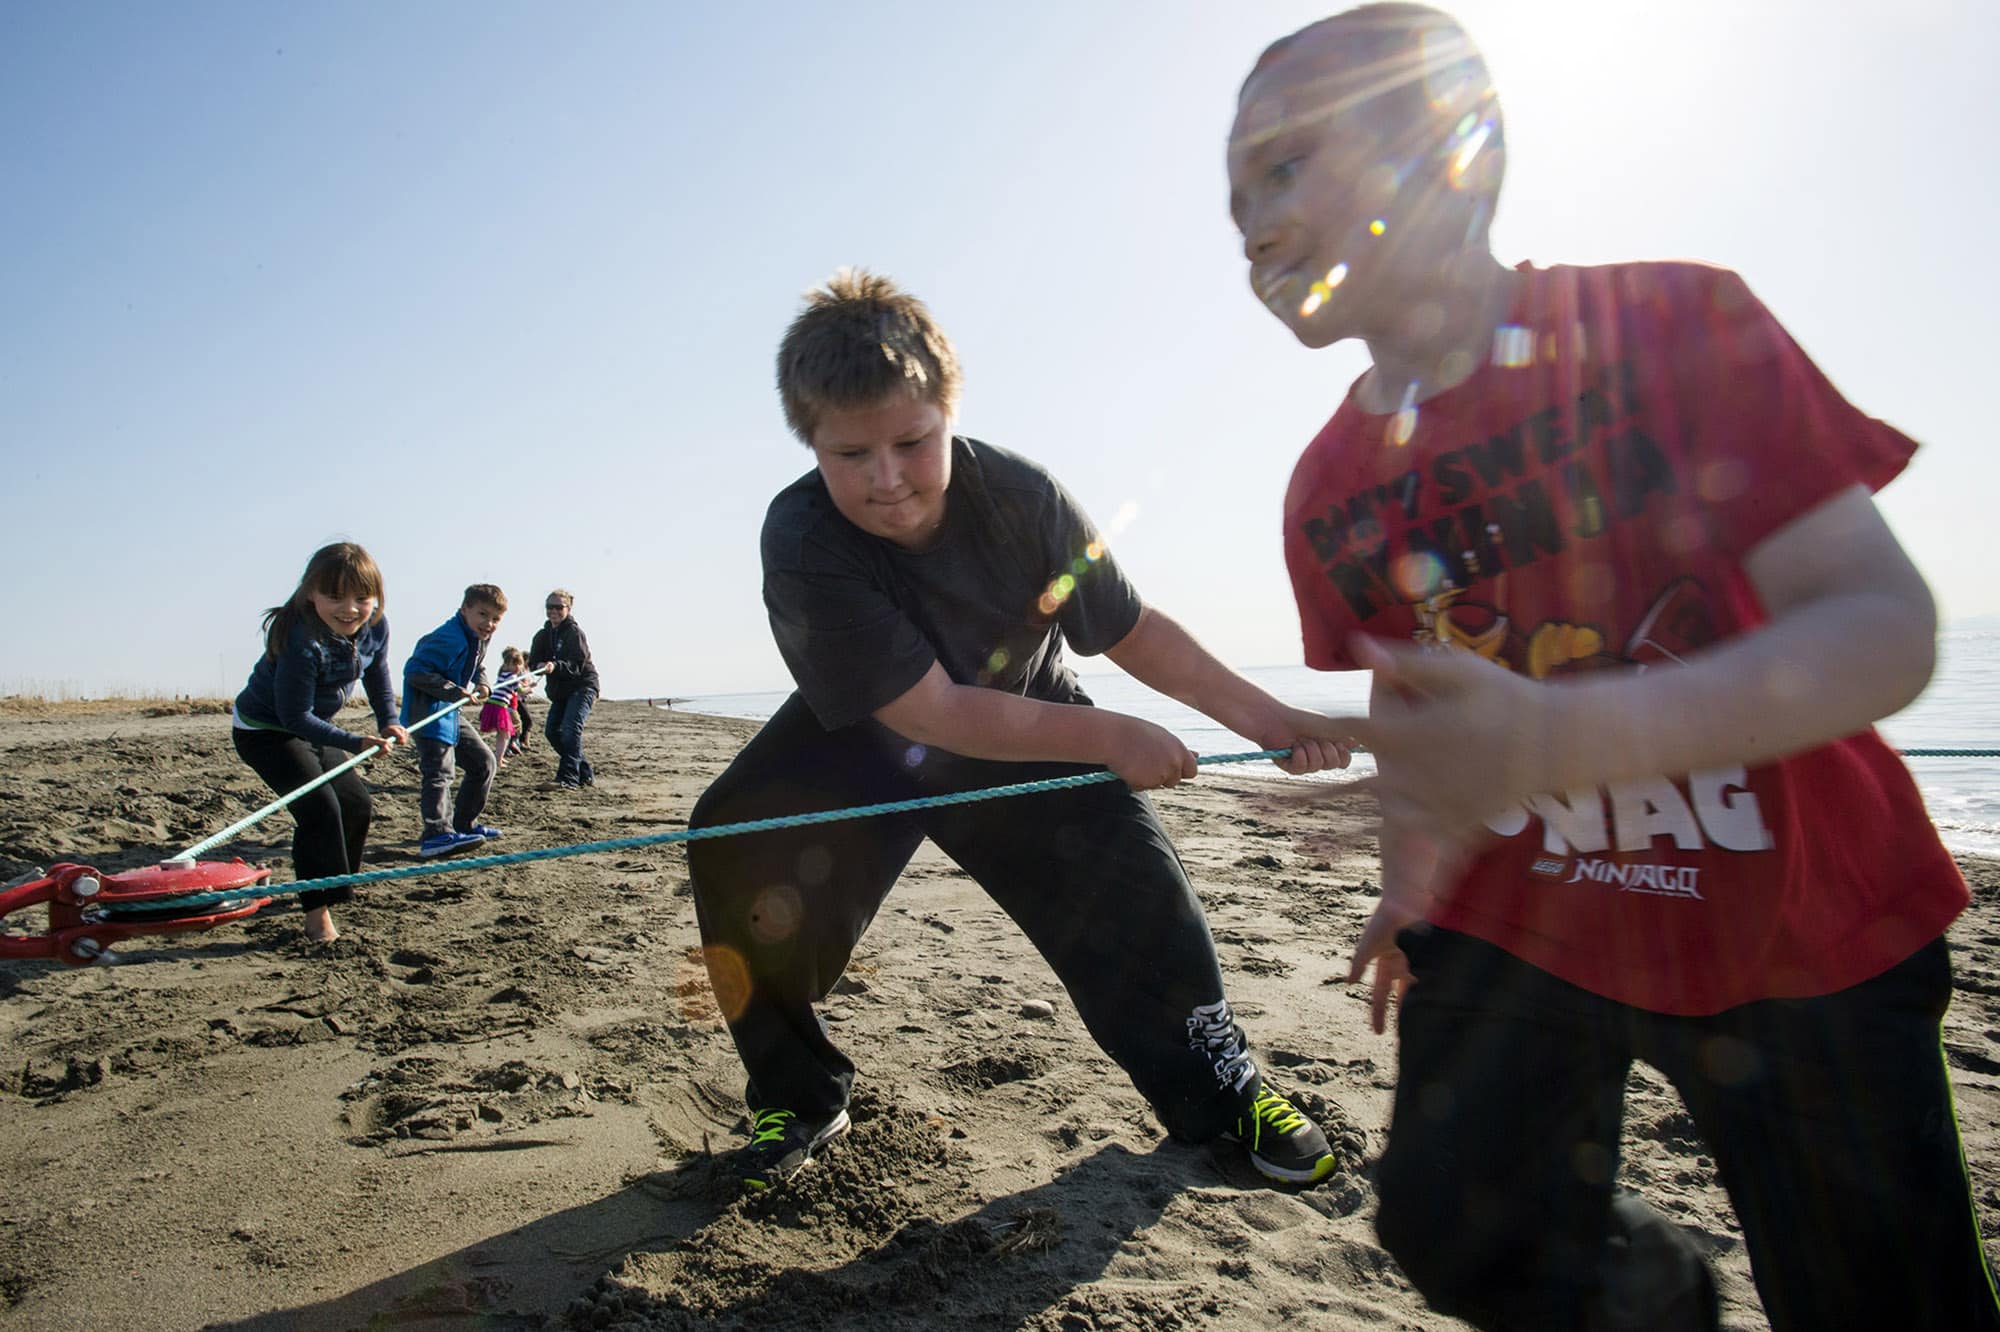 Children work together to pull in the tribe’s net.